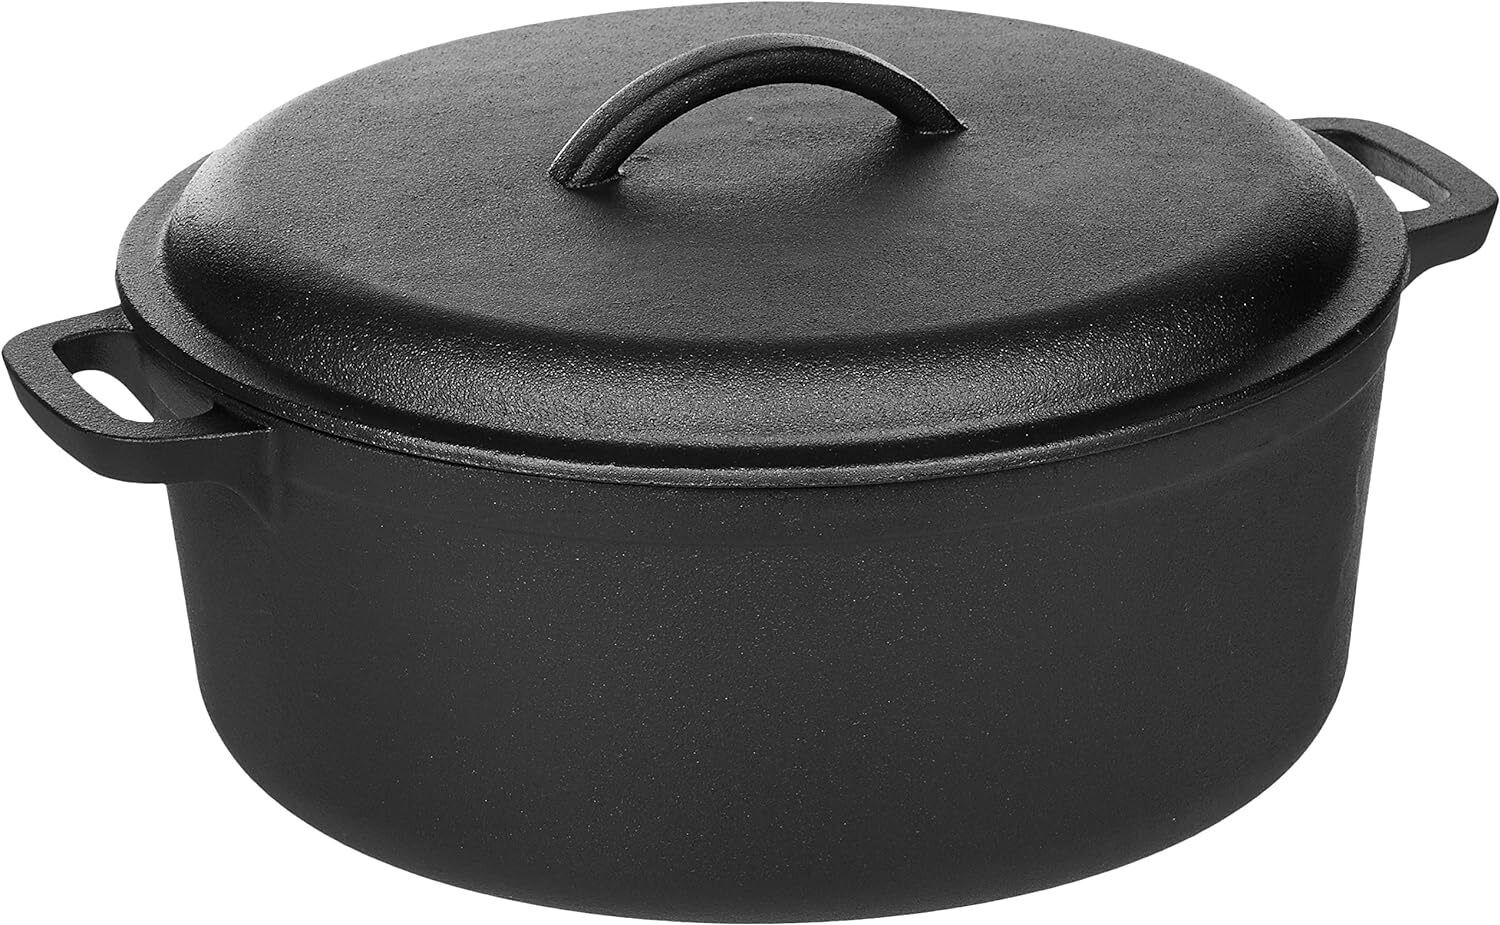 Pre-Seasoned Cast Iron Round Dutch Oven Pot with Lid and Dual Handles, 7-Quart